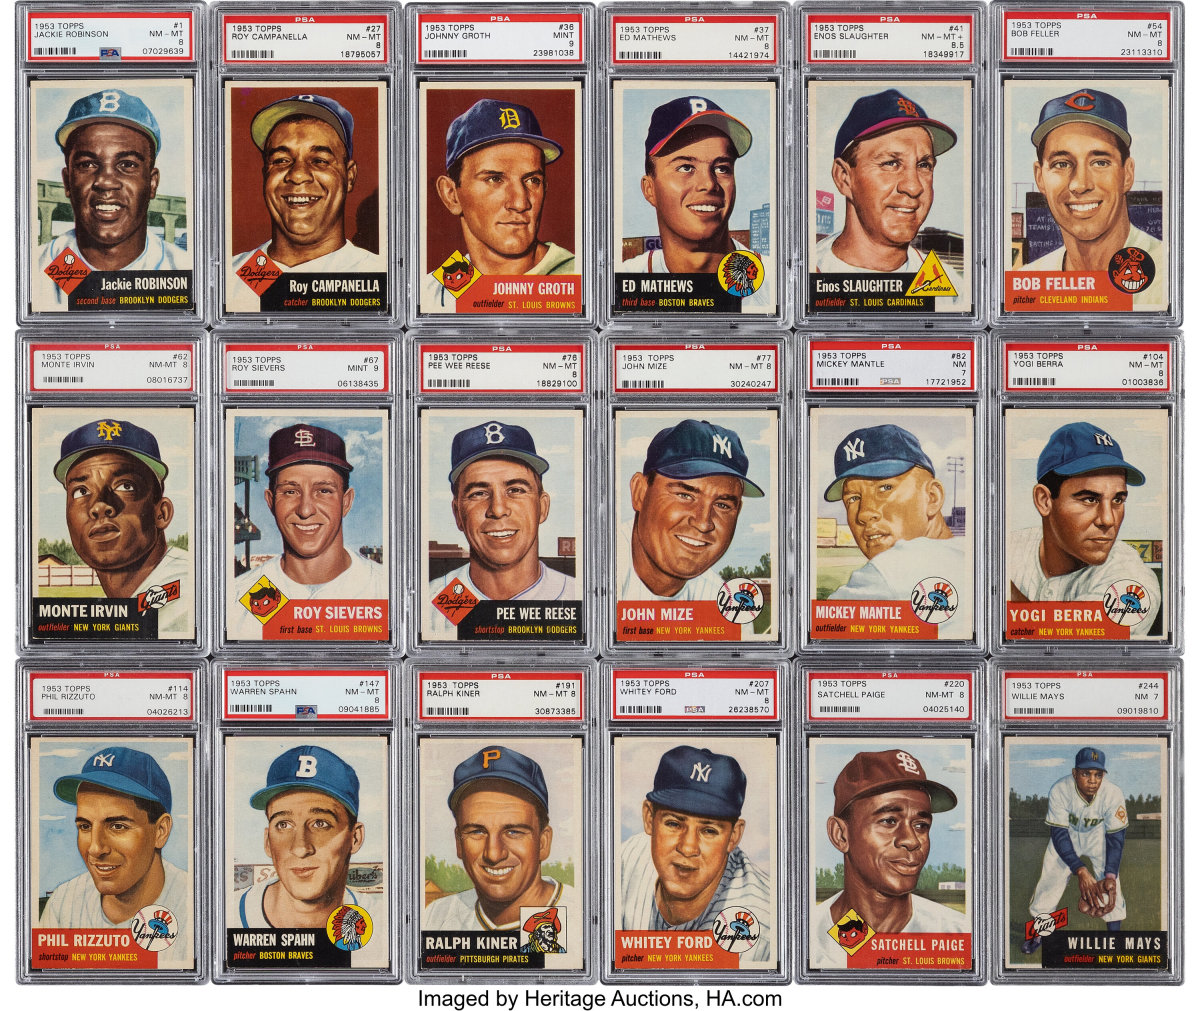 1956 Mantle Jersey Brings $649,250 in Mile High Auction